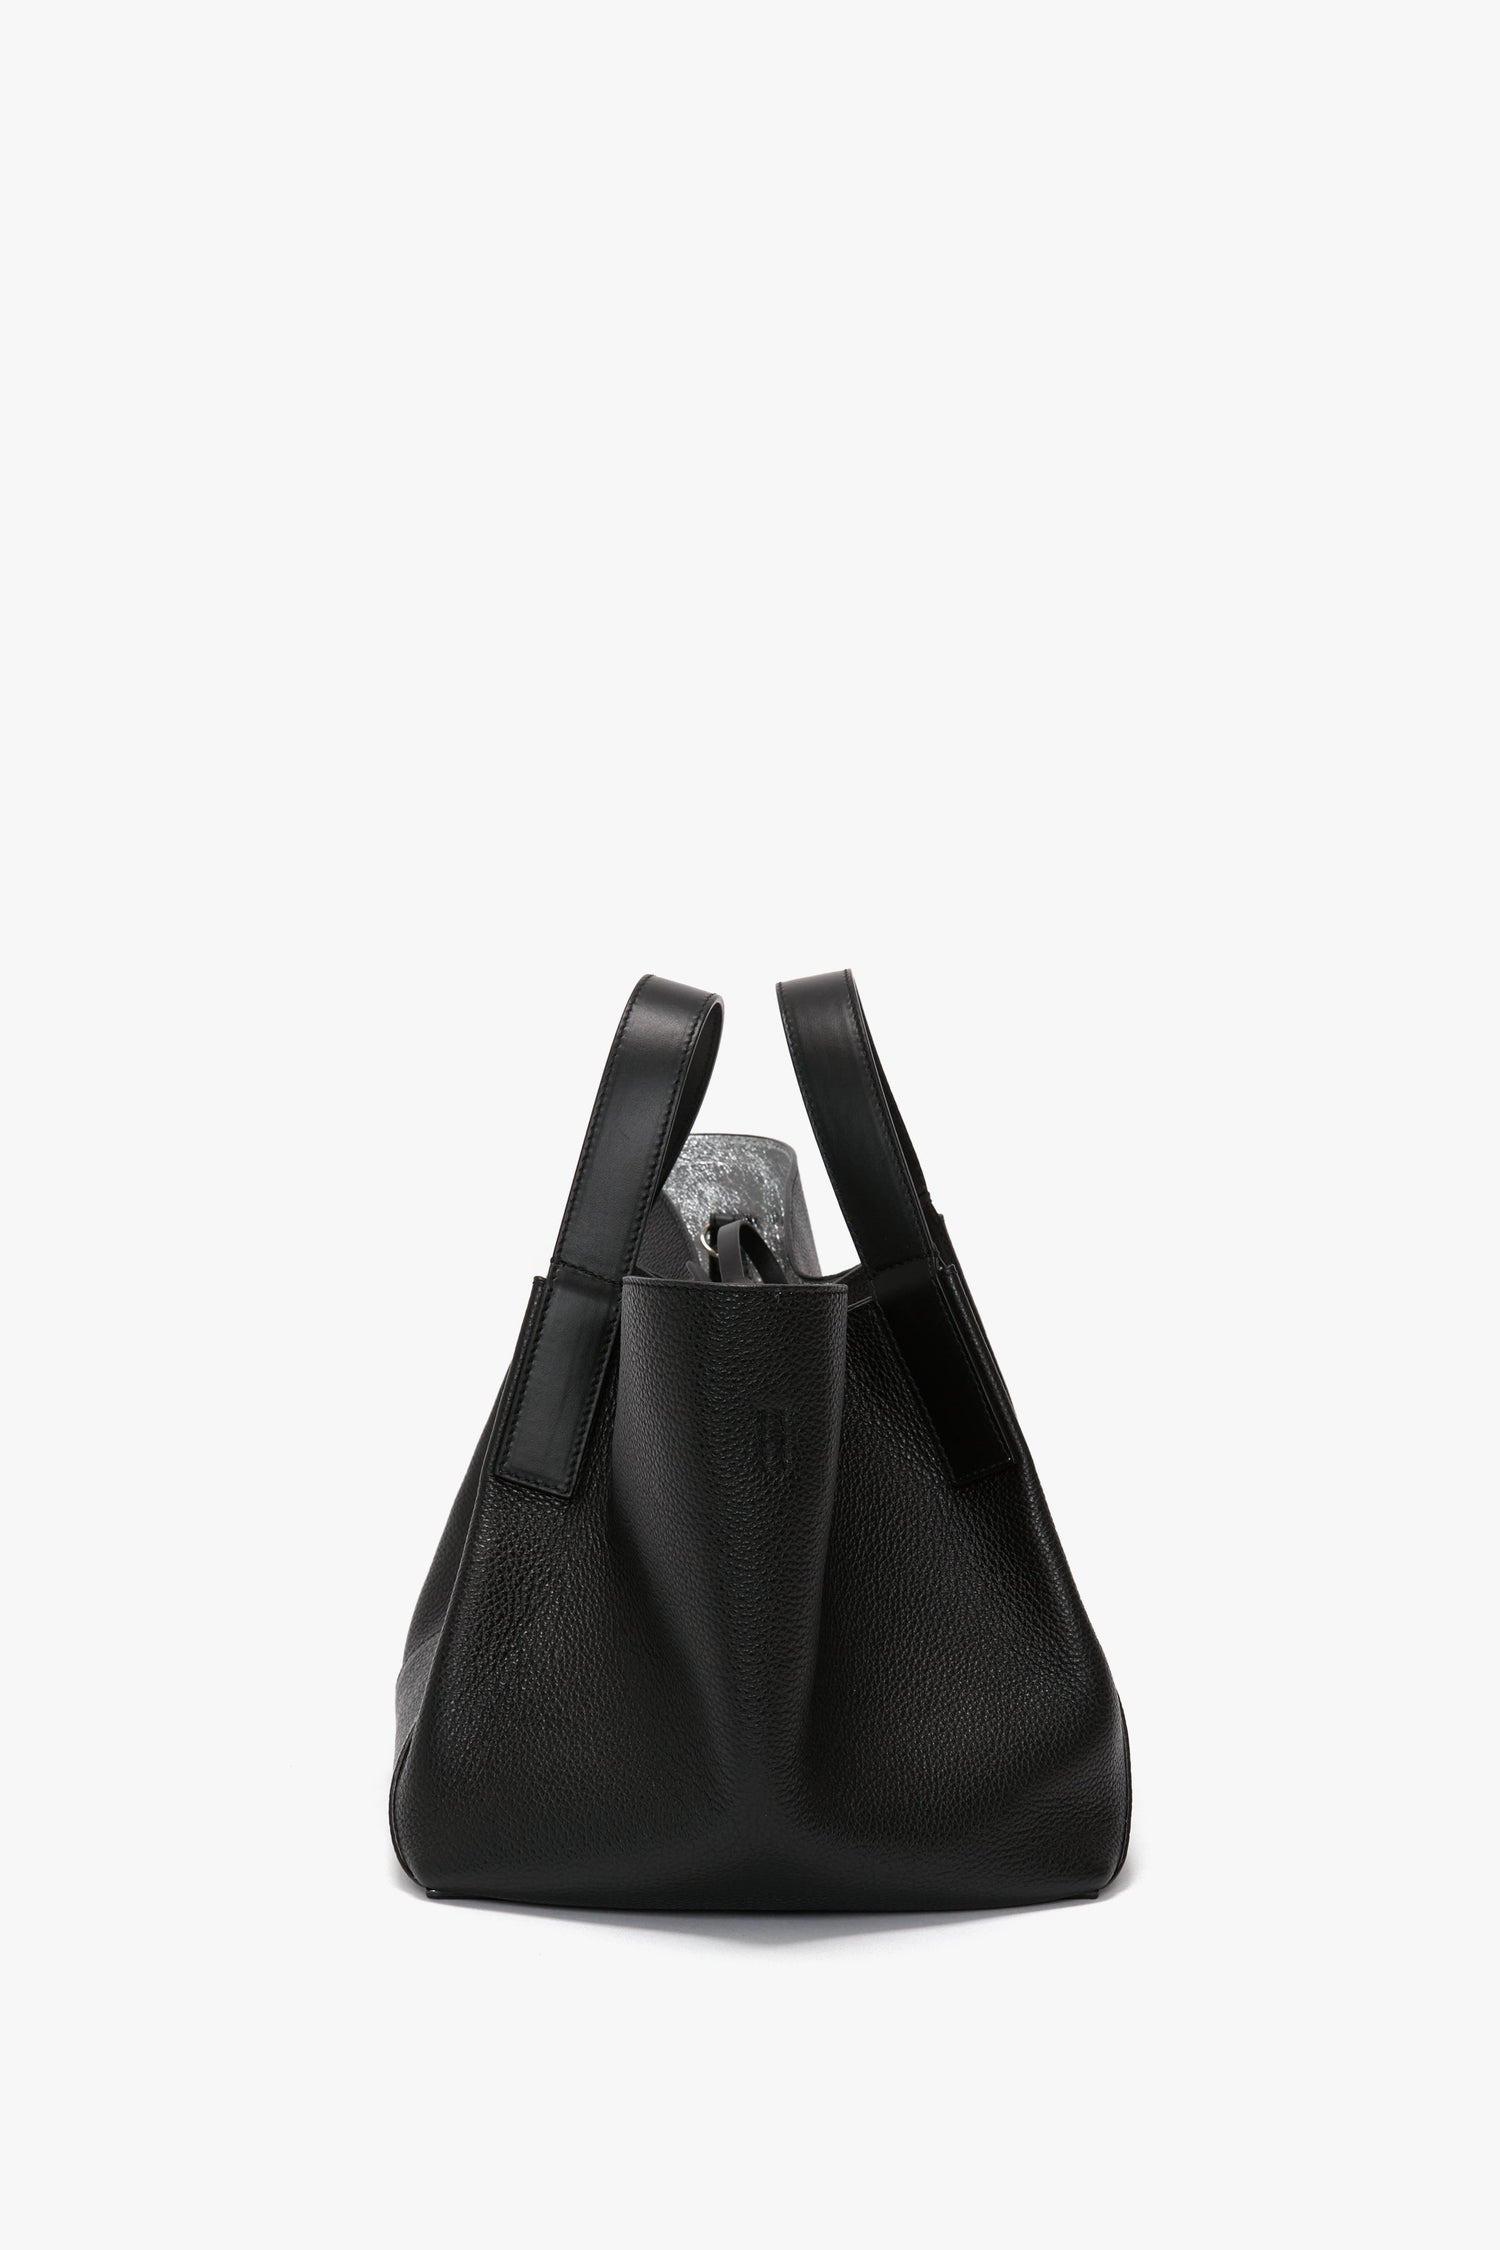 The Victoria Beckham W11 Mini Tote Bag In Black Leather, made from grainy calf leather, featuring a wide, slouchy design and two handles, photographed against a plain white background.